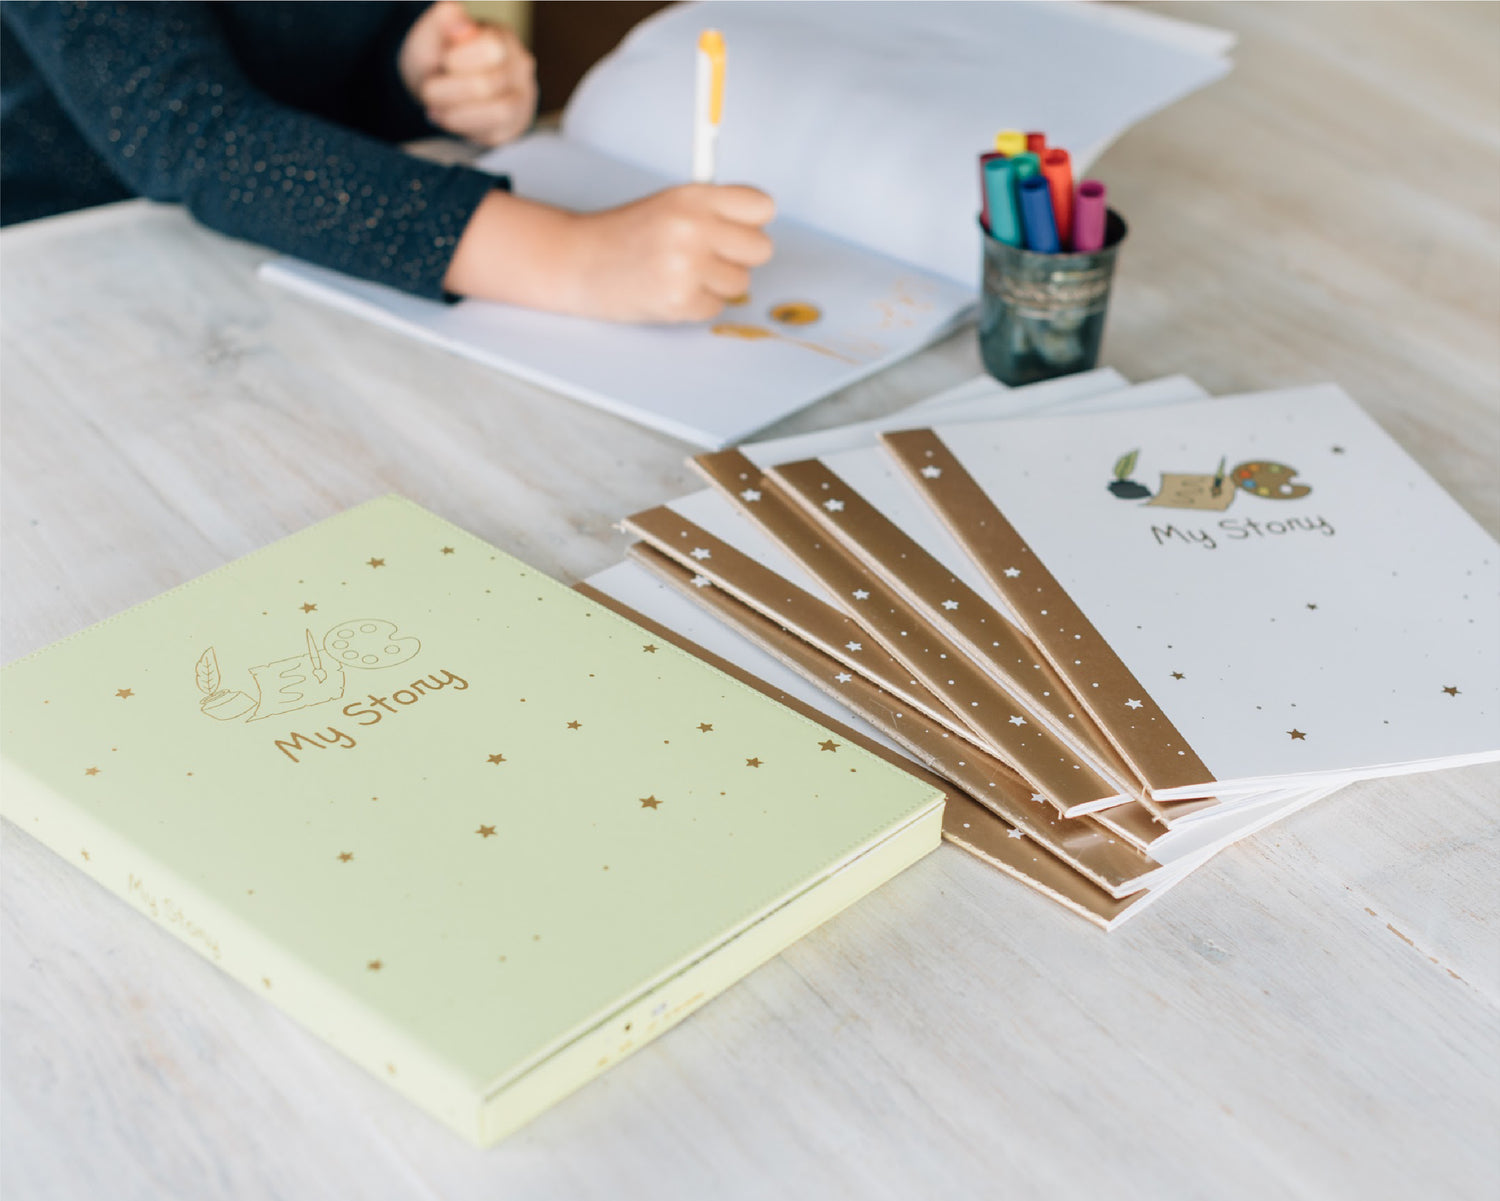 Personalize your recordable book